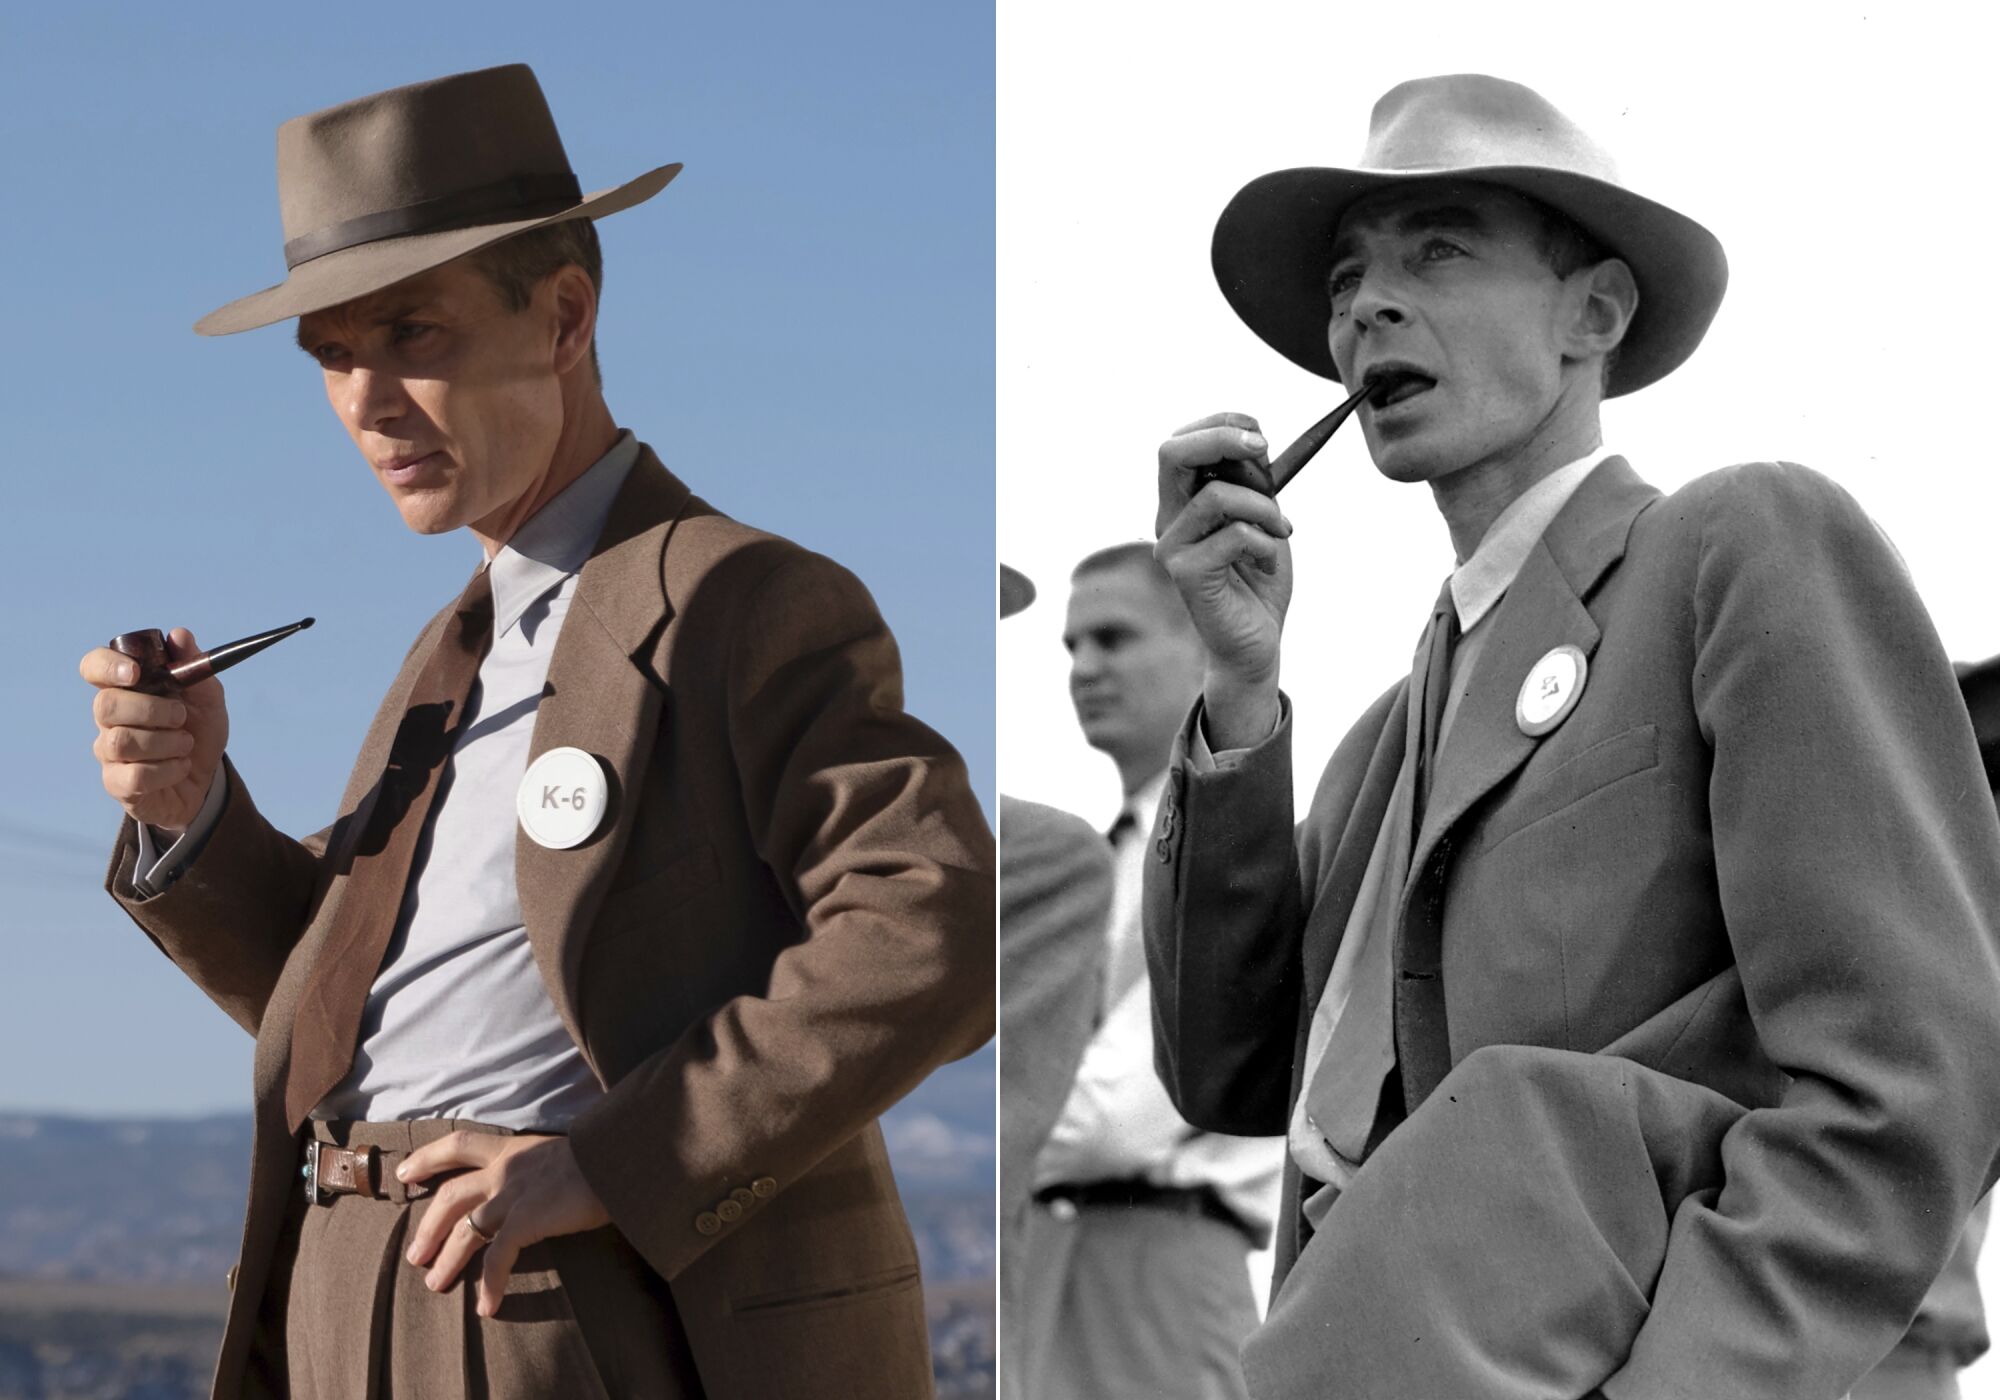 Two photos of a man wearing a suit, tie and hat, carrying a pipe, next to each other.